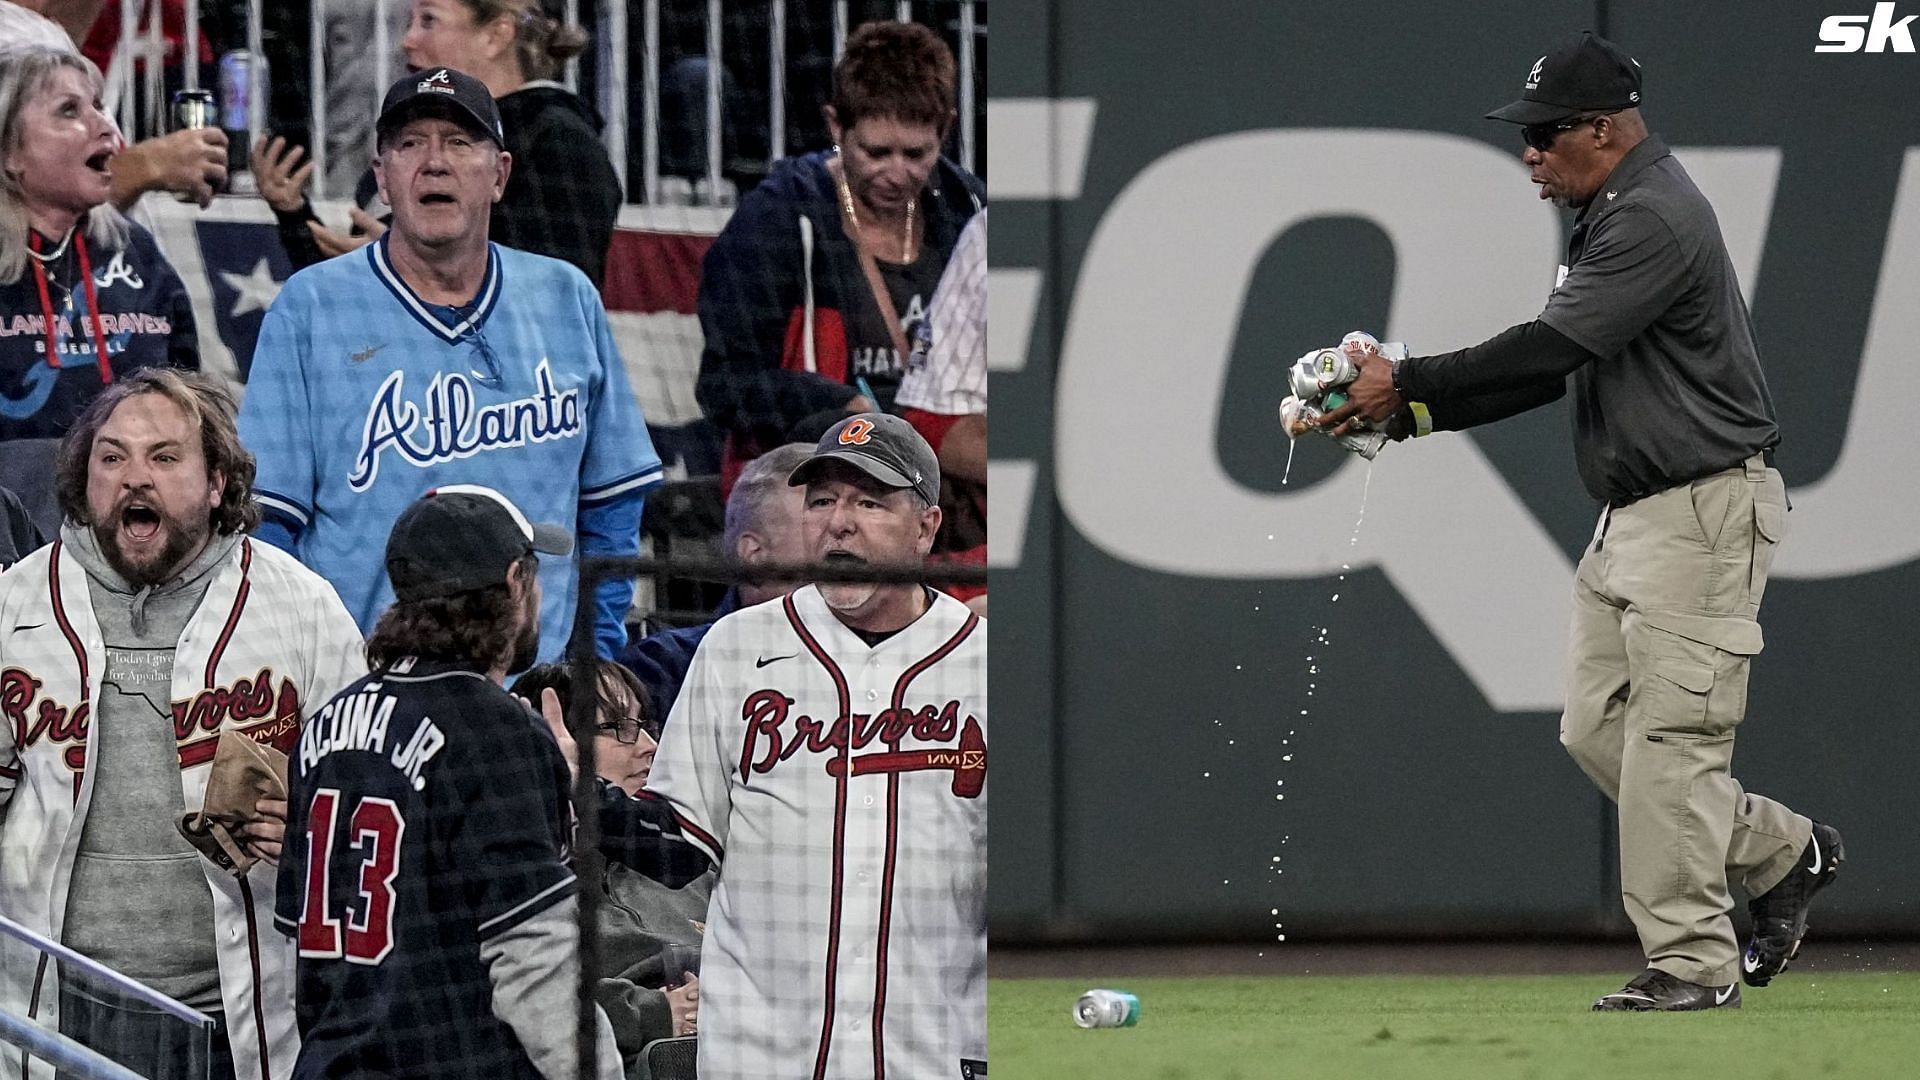 MLB fans left furious as Braves supporters throw trash on field during game  1 of NLDS: This is unacceptable